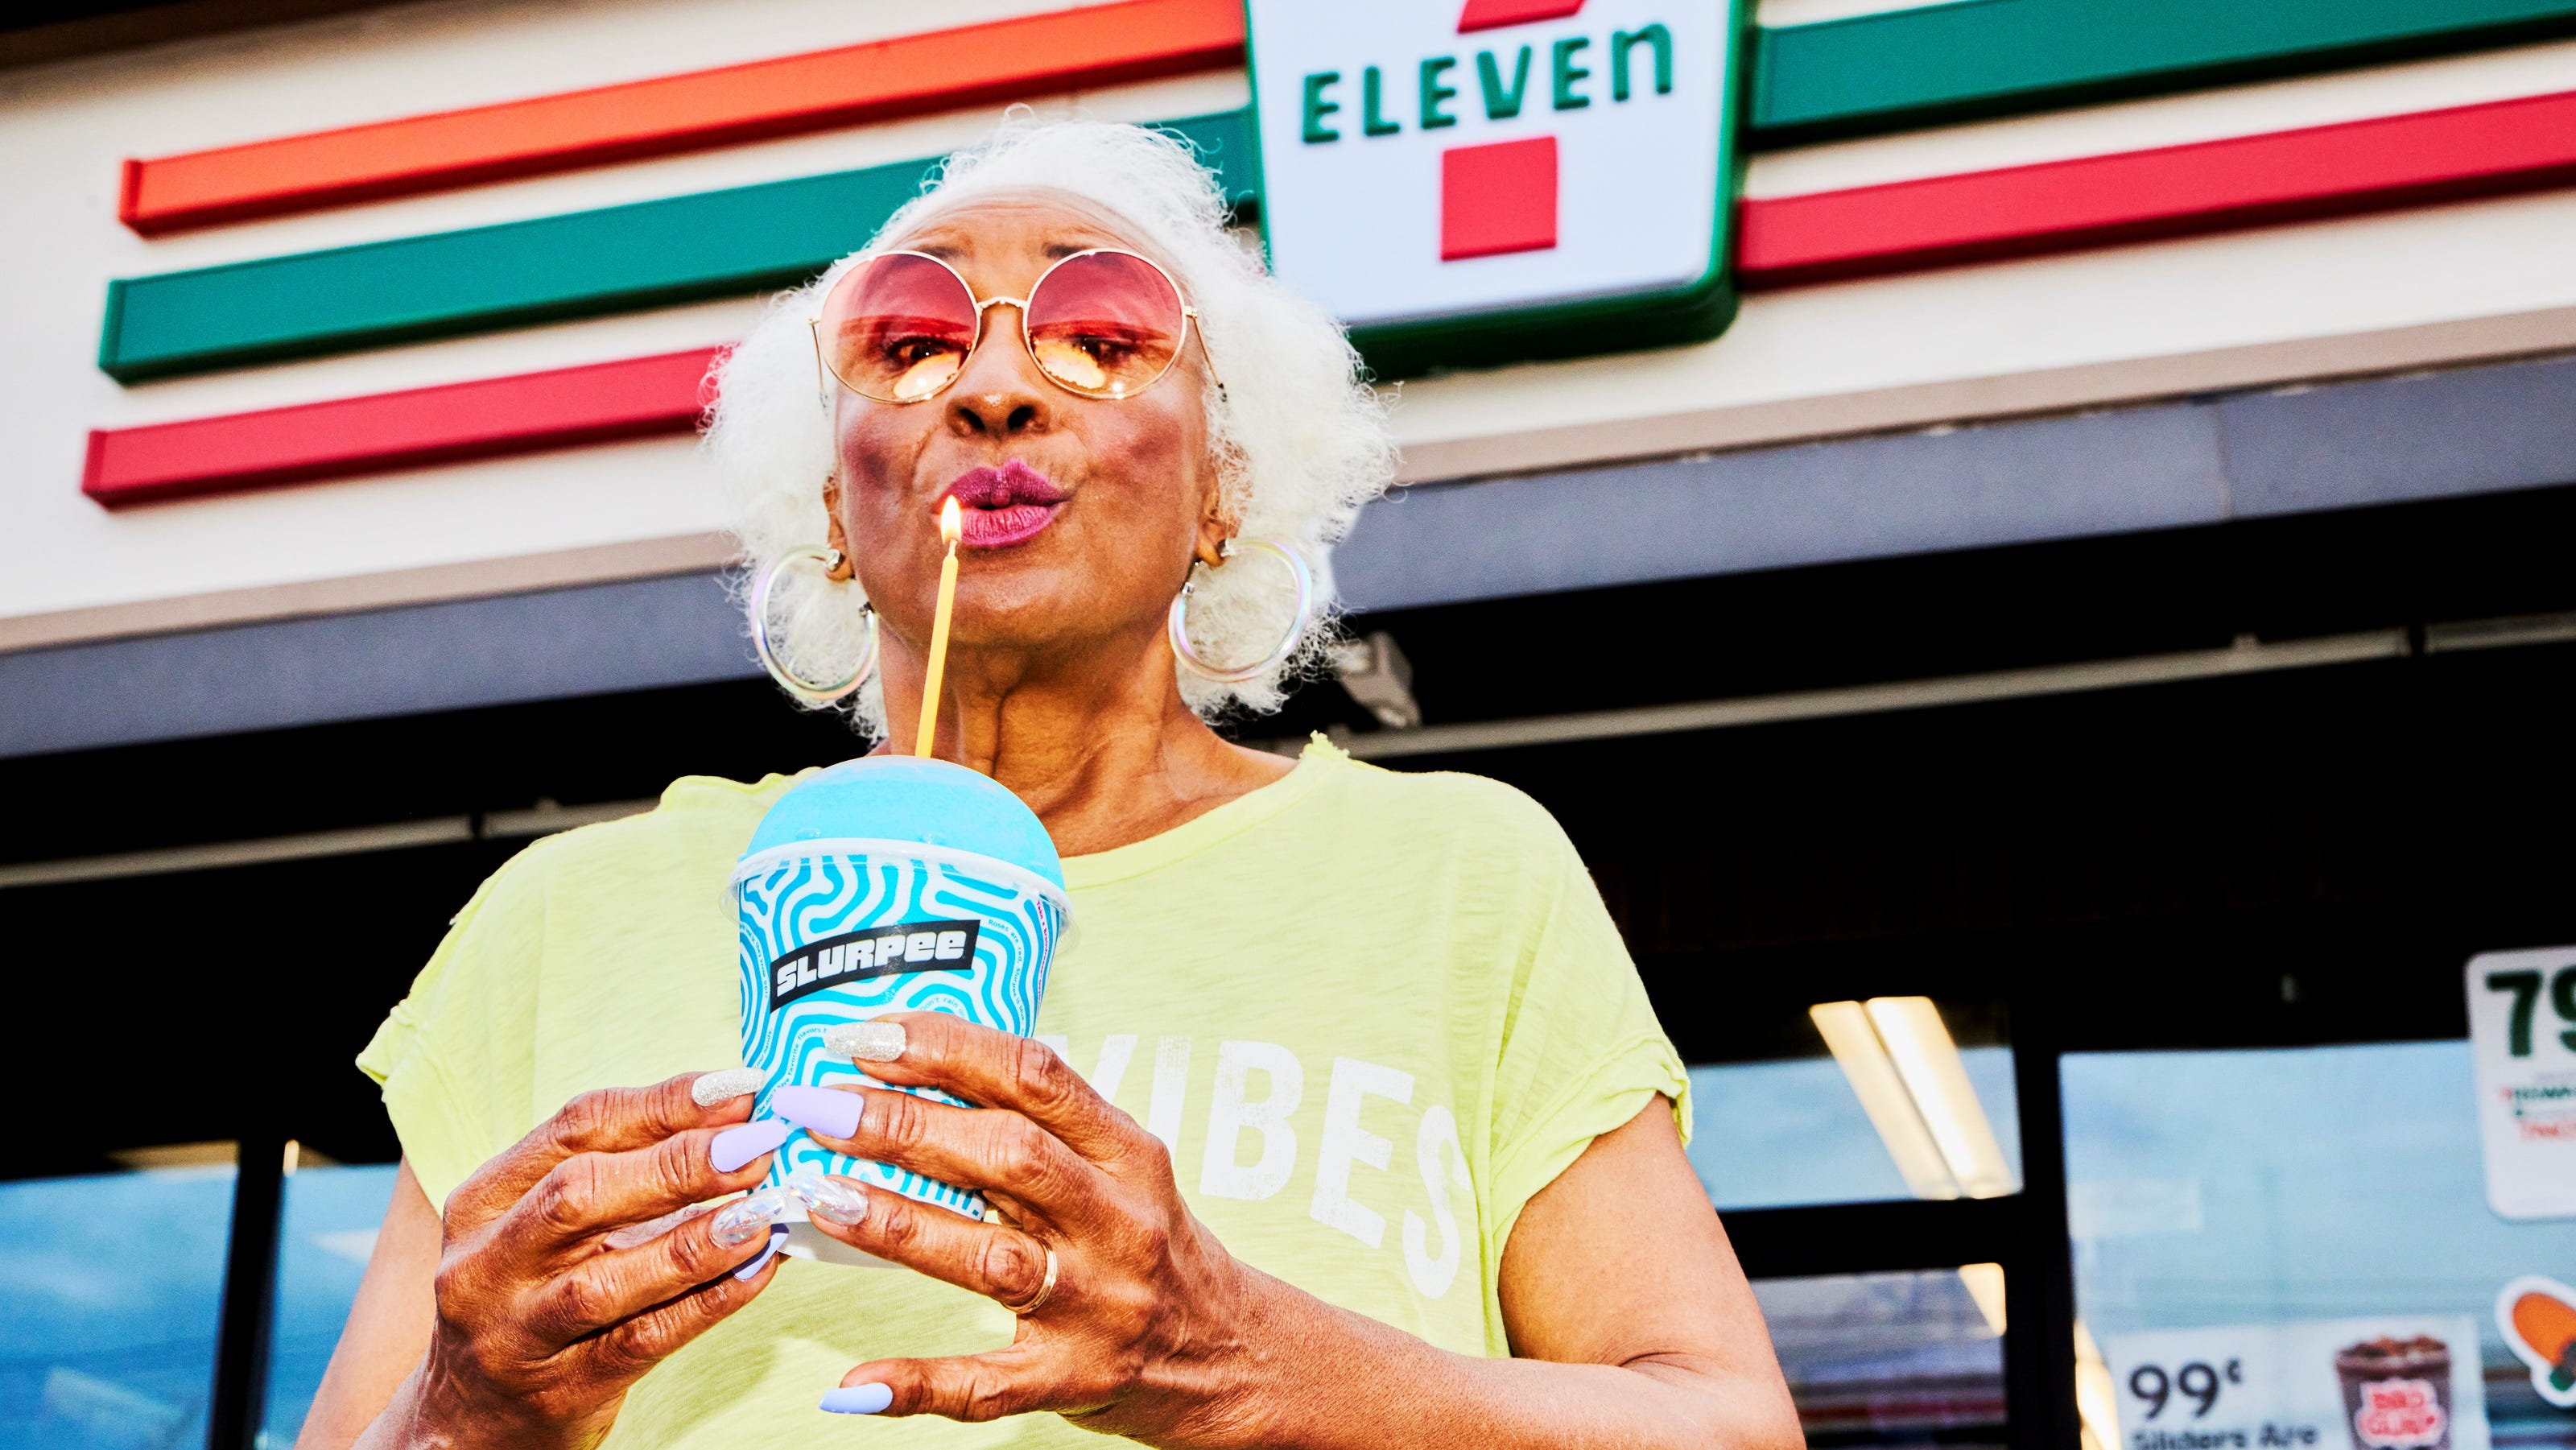 Today is Free Slurpee Day